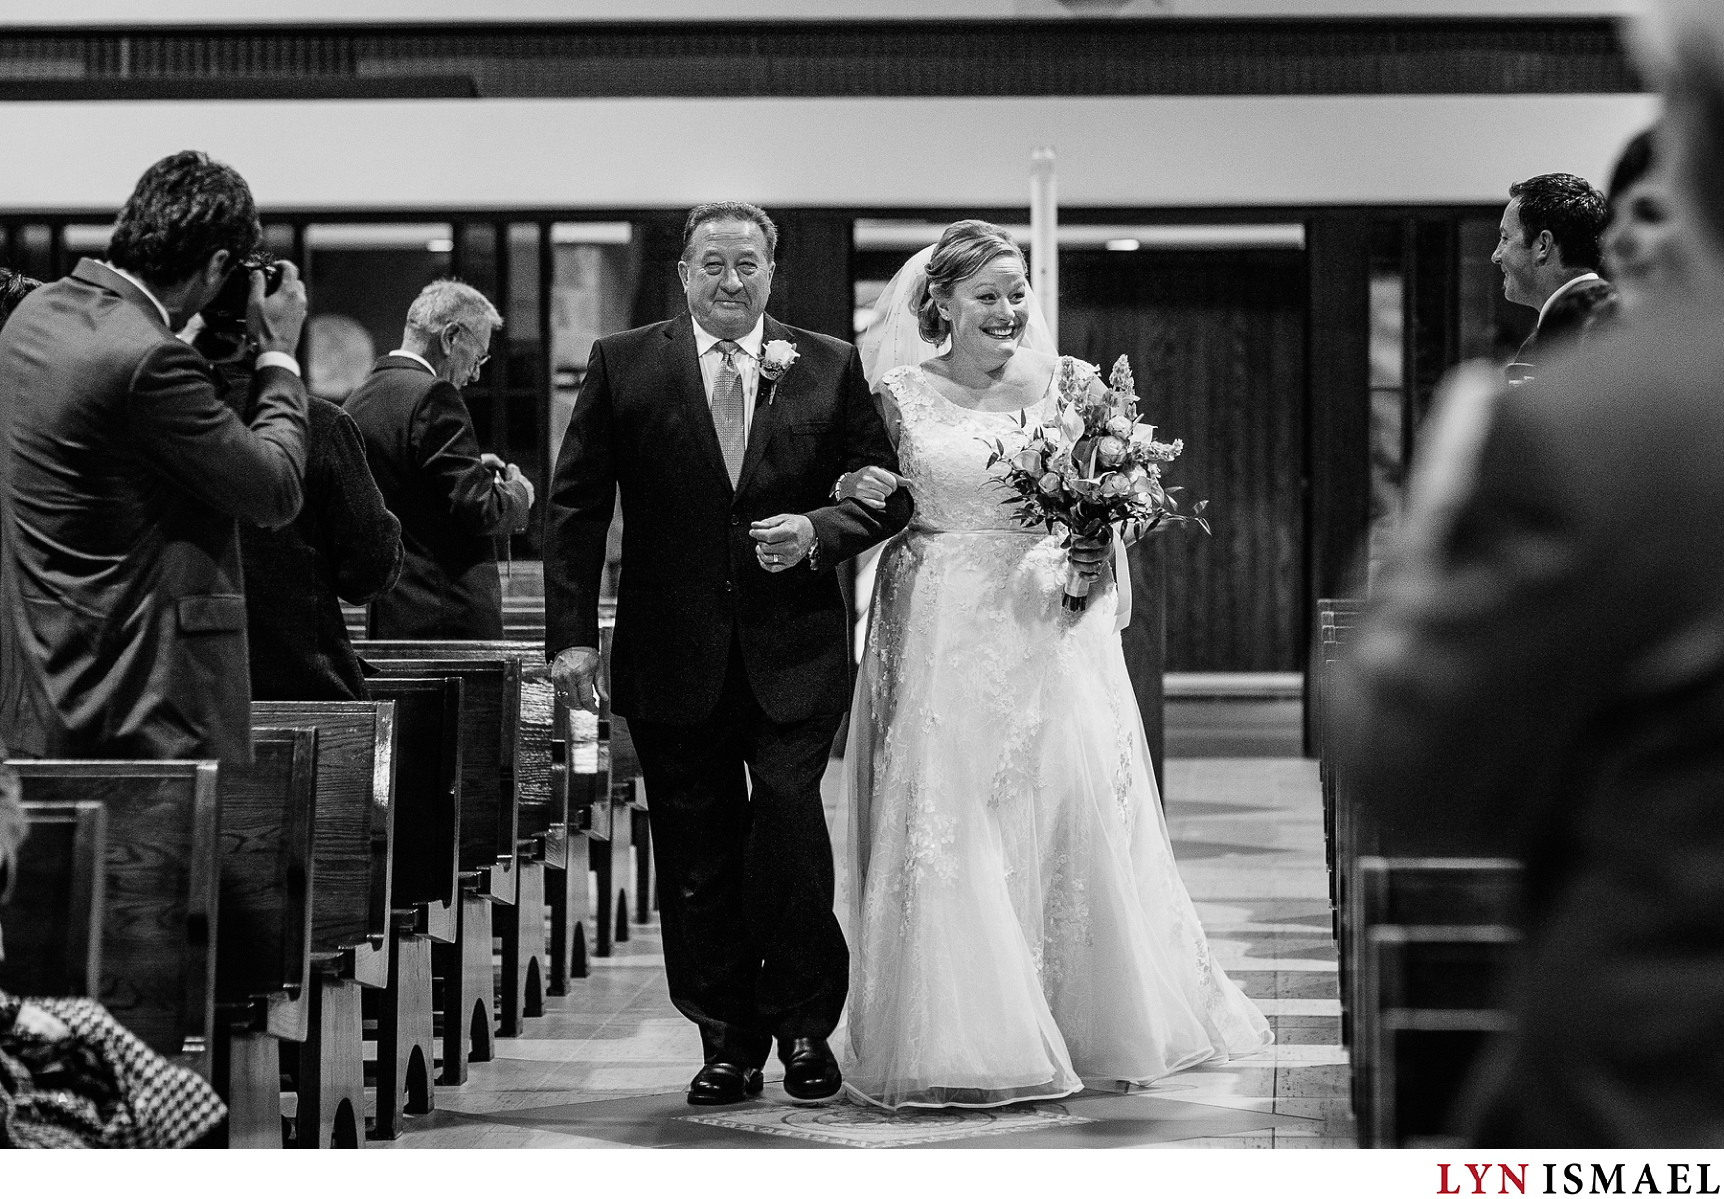 Bride walks down the aisle with her father at her side at St Michael Catholic Church in Waterloo, Ontario.